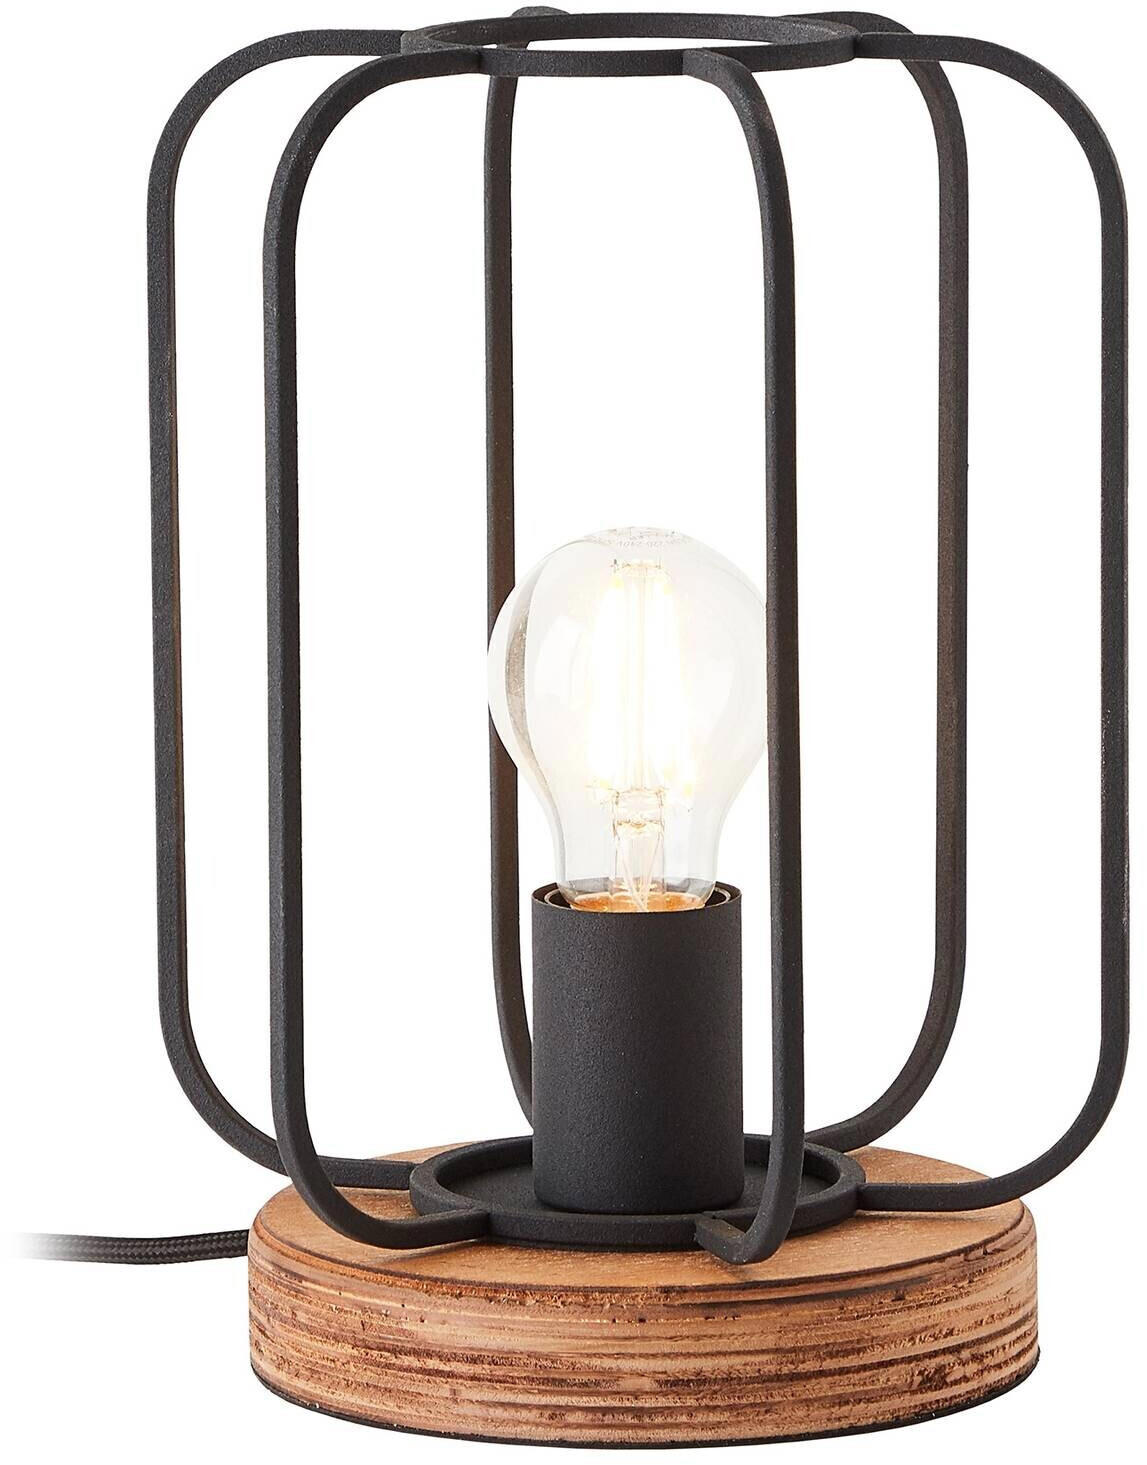 Brilliant Tosh table lamp with wooden base